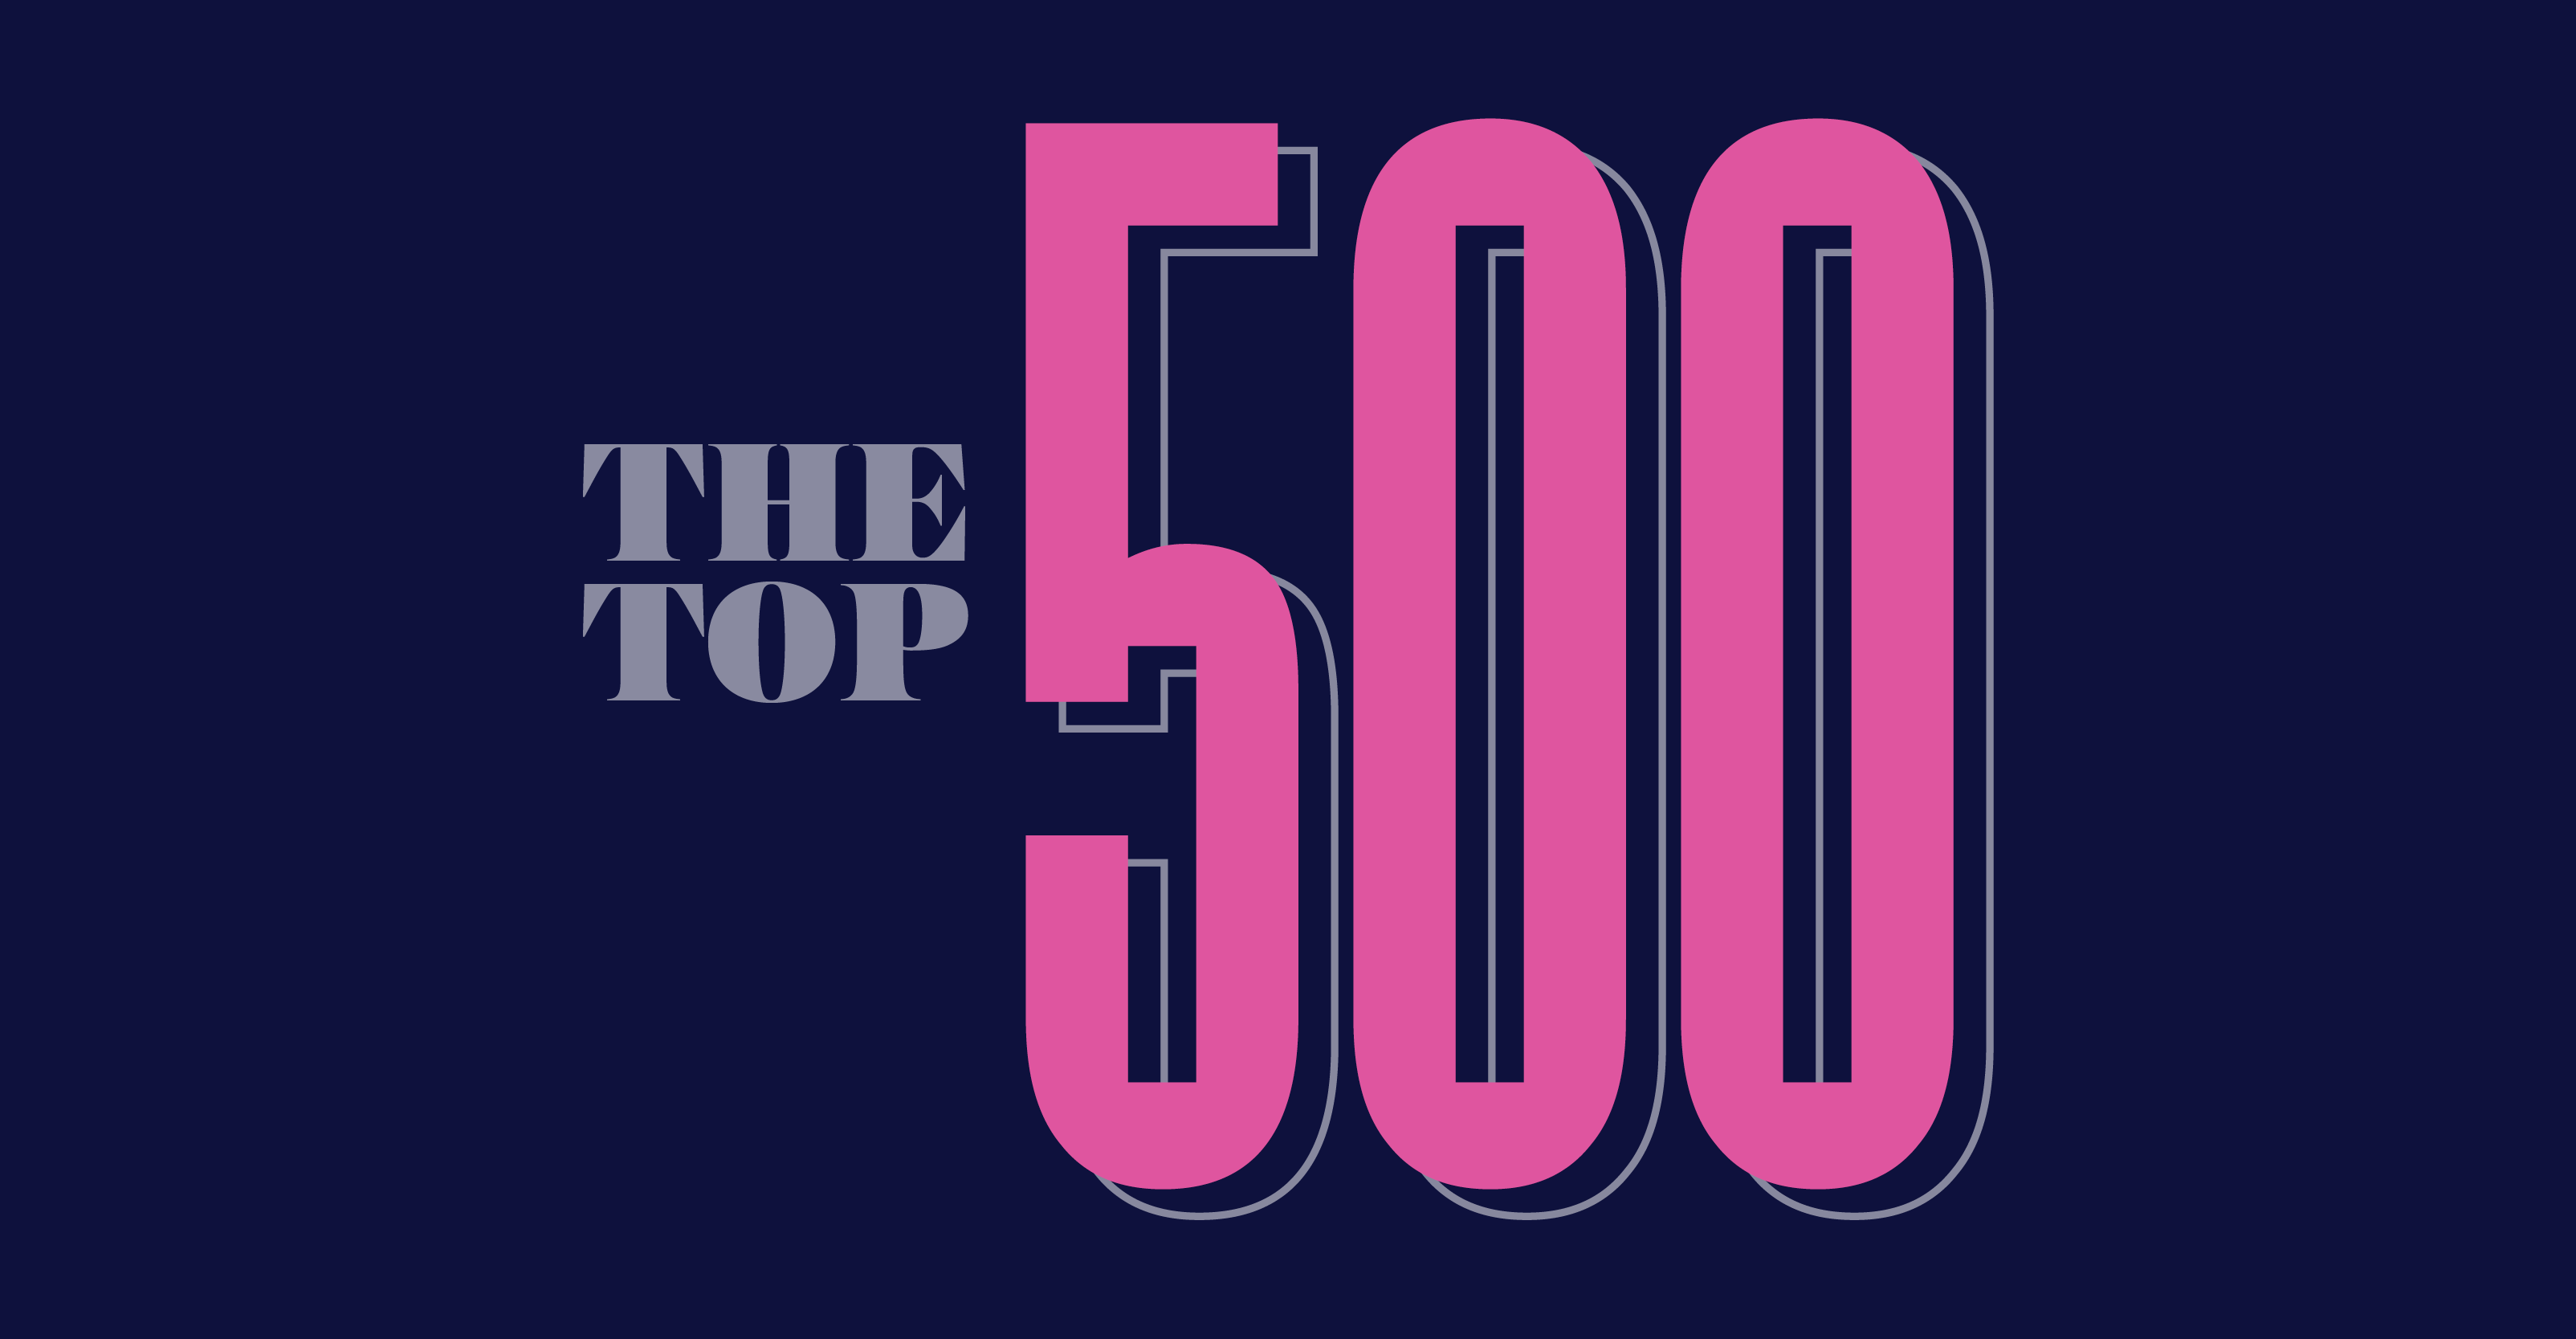 Meet the Top 500 restaurant chains in America Nation's Restaurant News